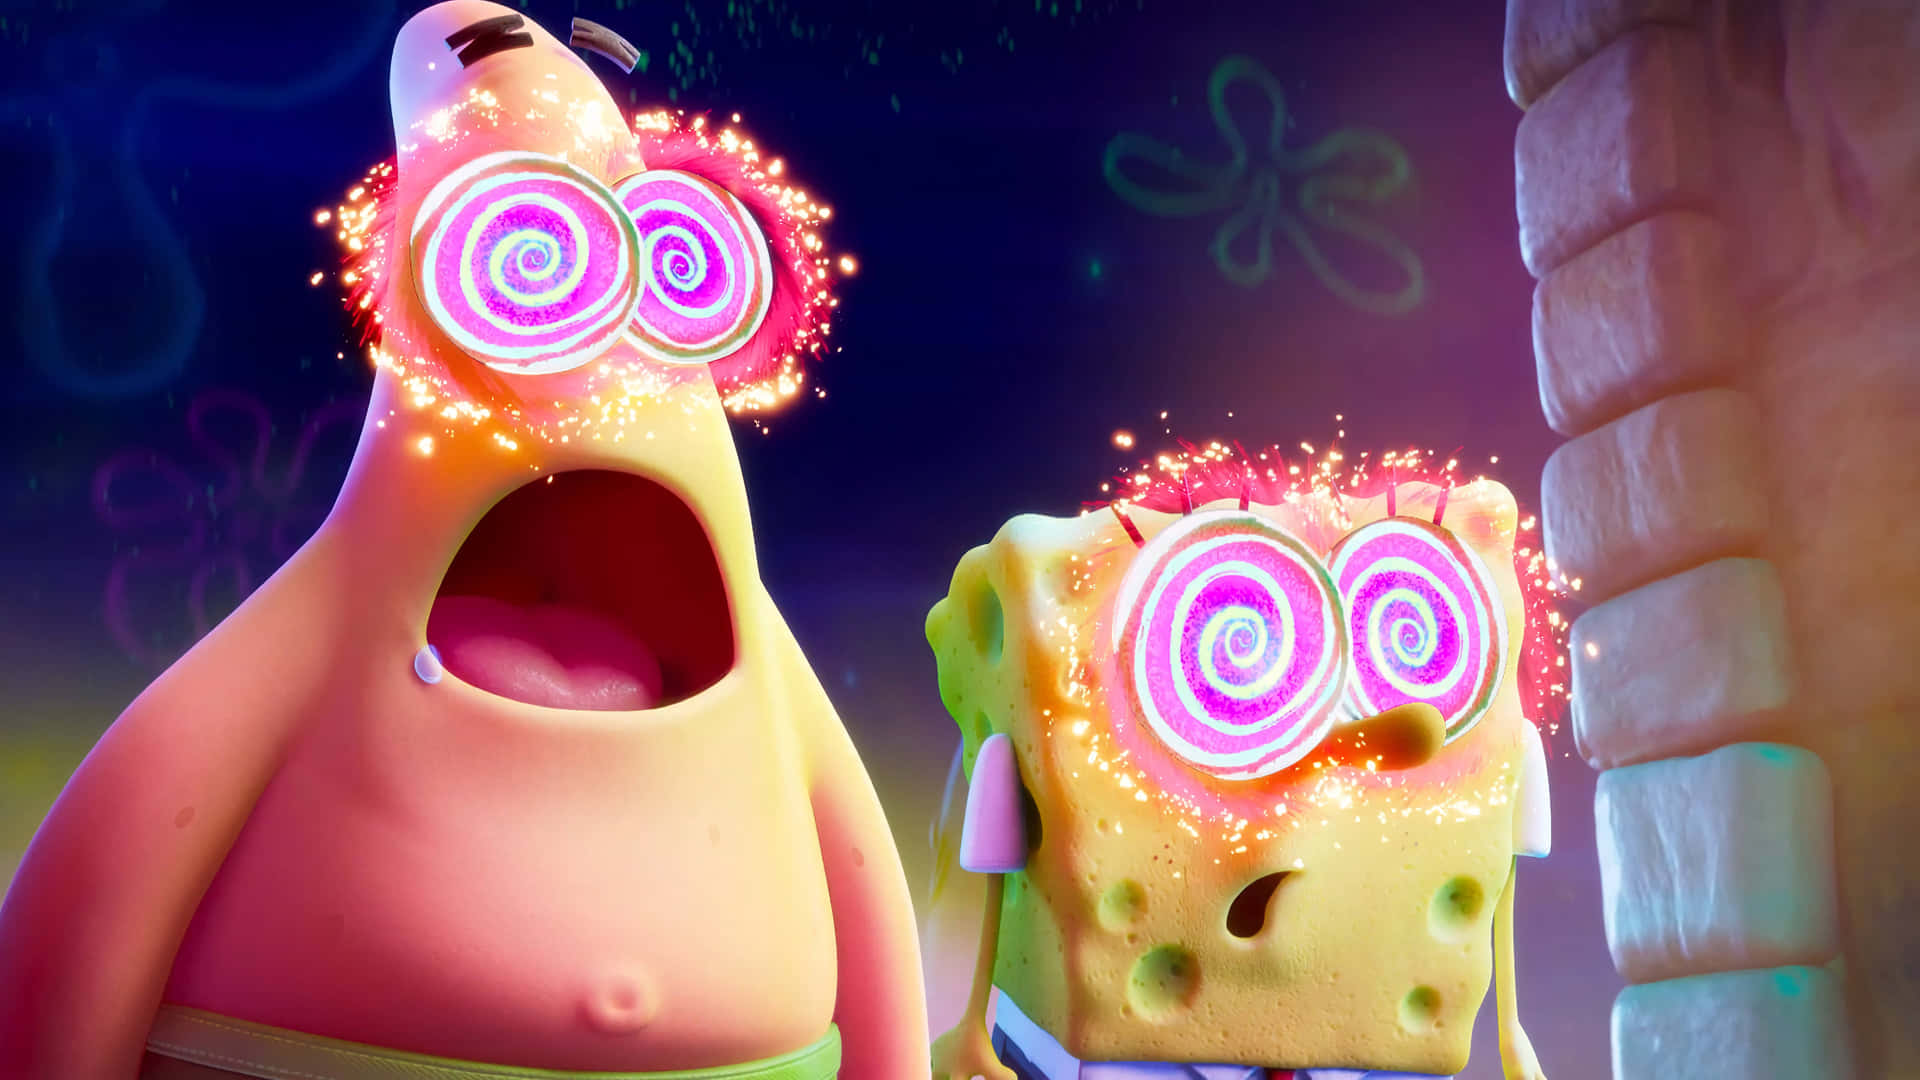 Bring The Fun To Your Desktop With This Spongebob Wallpaper